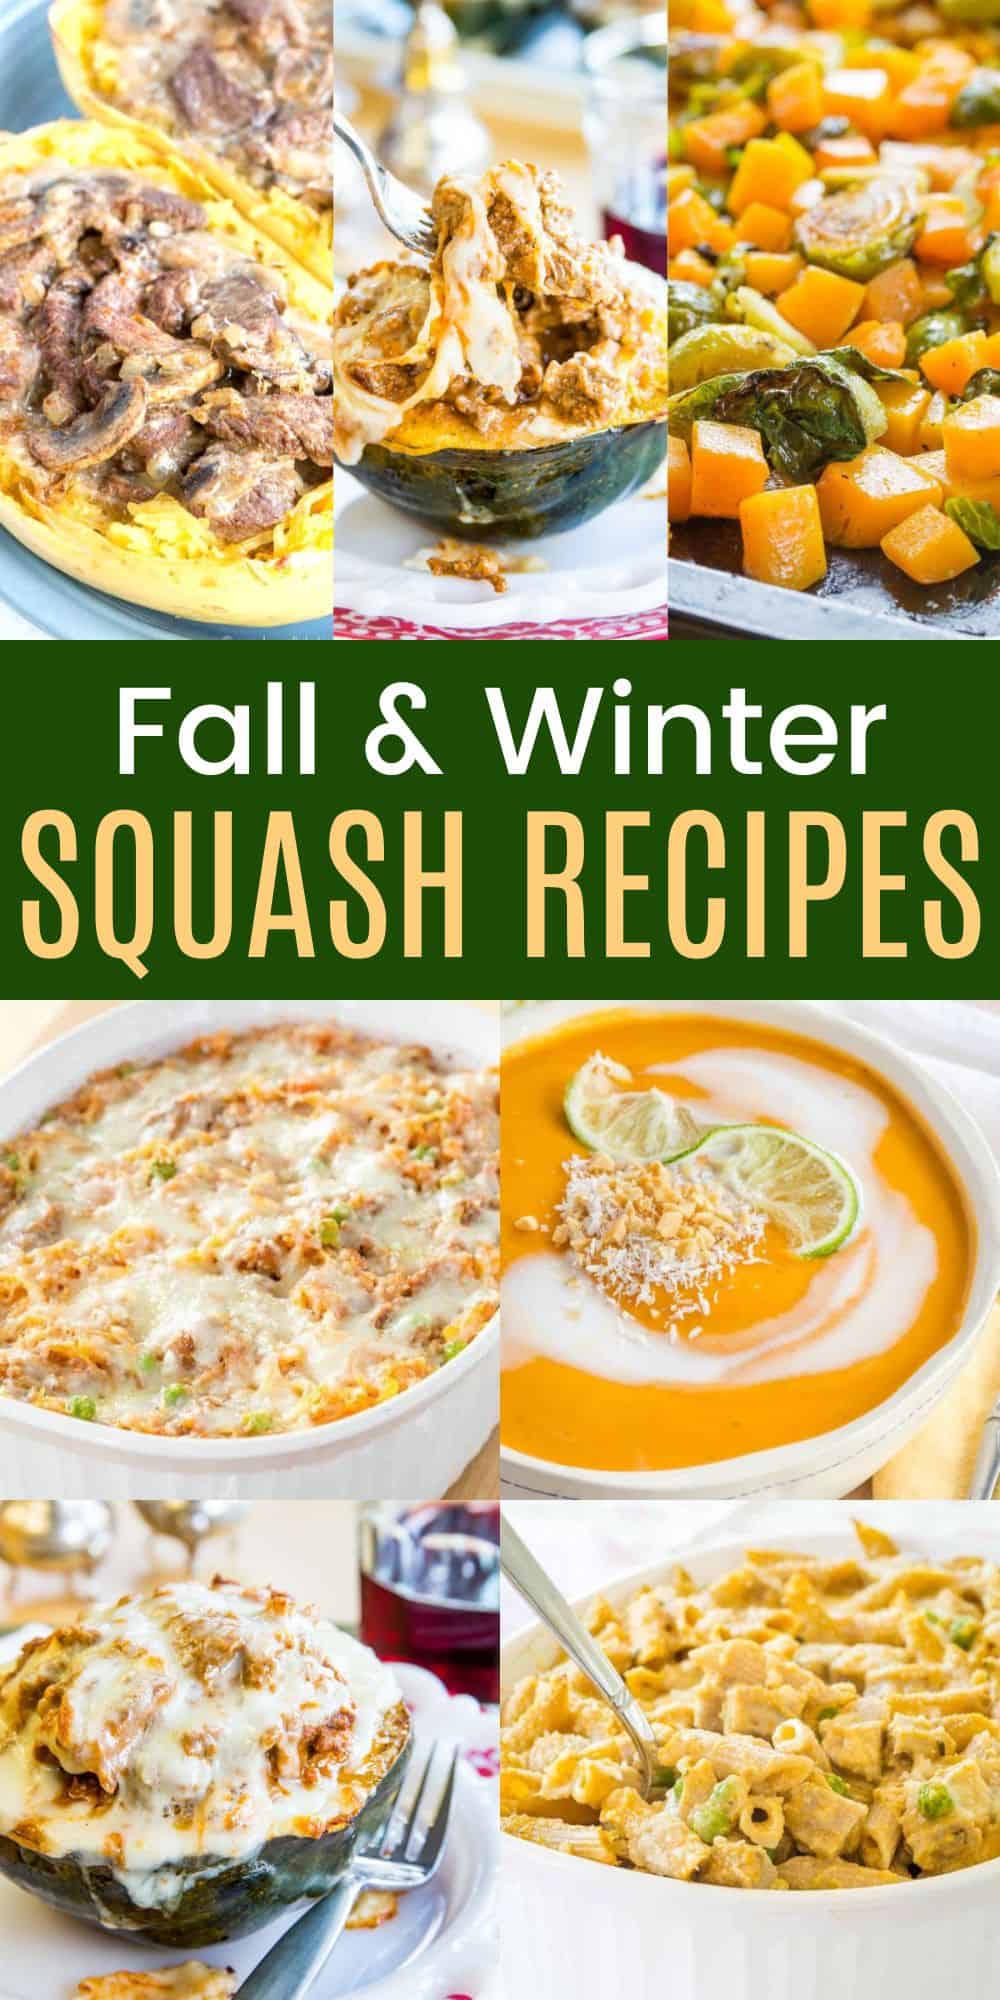 30+ Savory Winter Squash Recipes | Cupcakes & Kale Chips